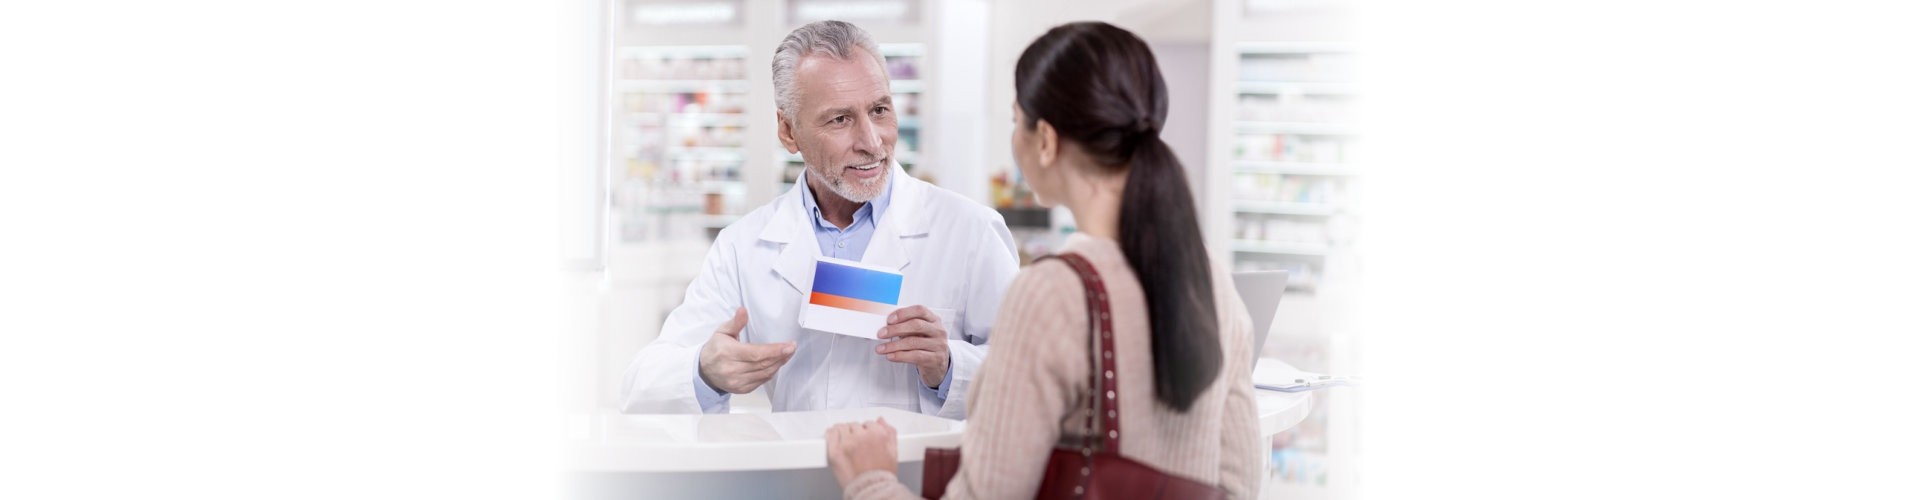 Best choice. Mature handsome male pharmacist holding drug while chatting with client